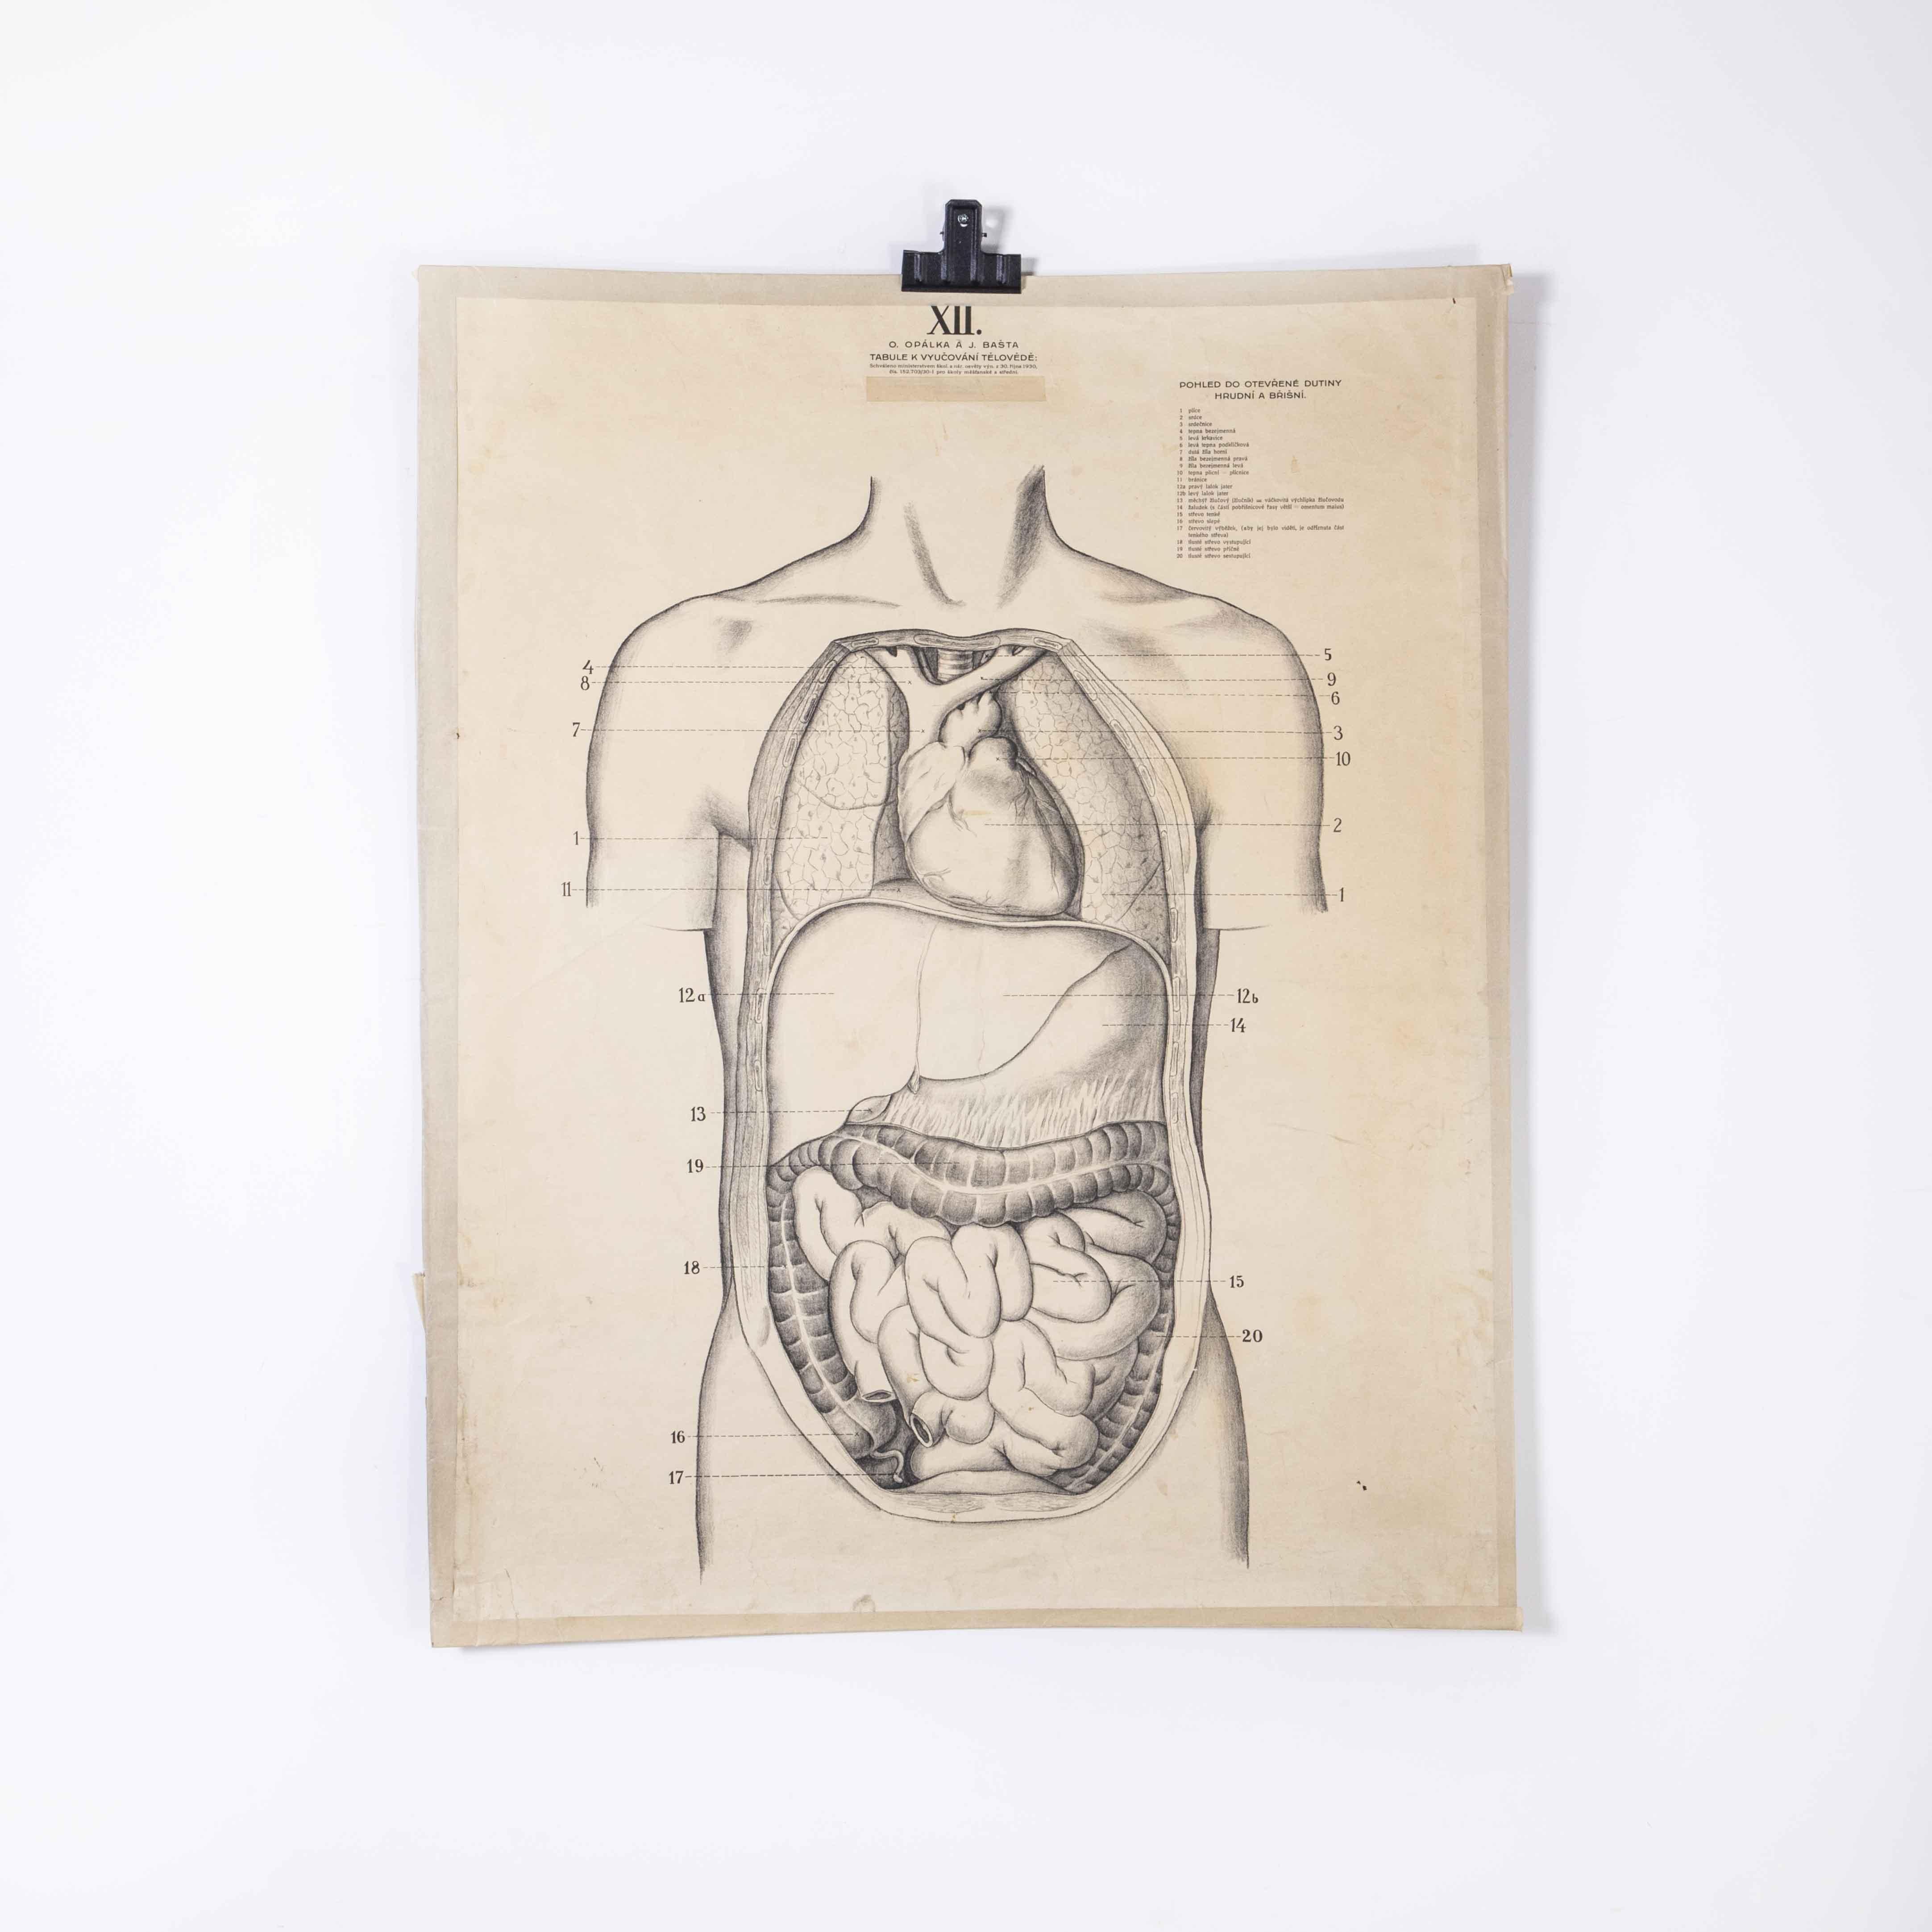 1930’s Educational Poster – Human Anatomy Internal Organs
1930’s Educational Poster – Human Anatomy Internal Organs. Early 20th century Czechoslovakian educational chart. A rare and vintage wall chart from the Czech Republic illustrating the human